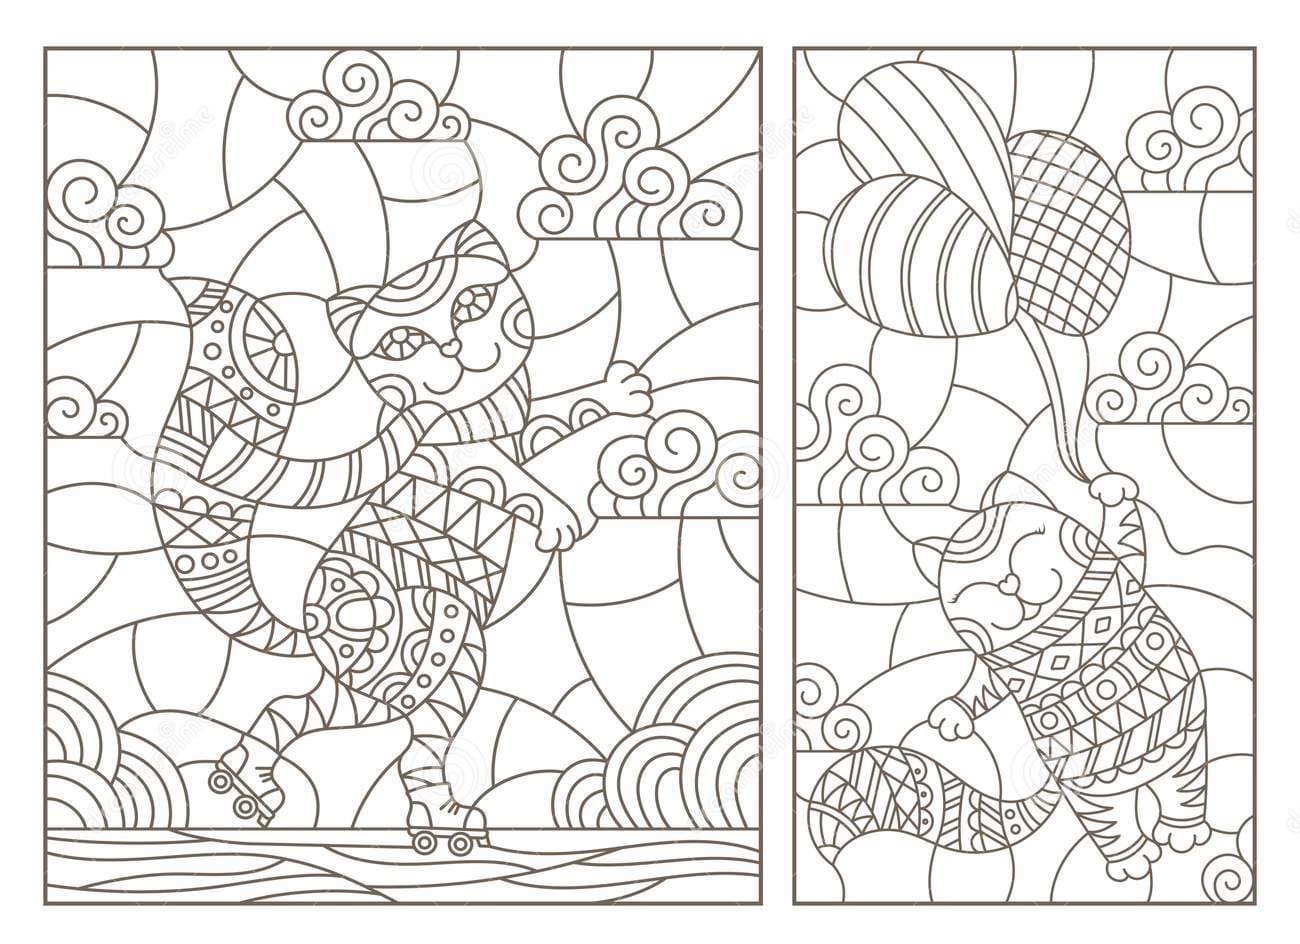 Cat Roller Skate Coloring Page